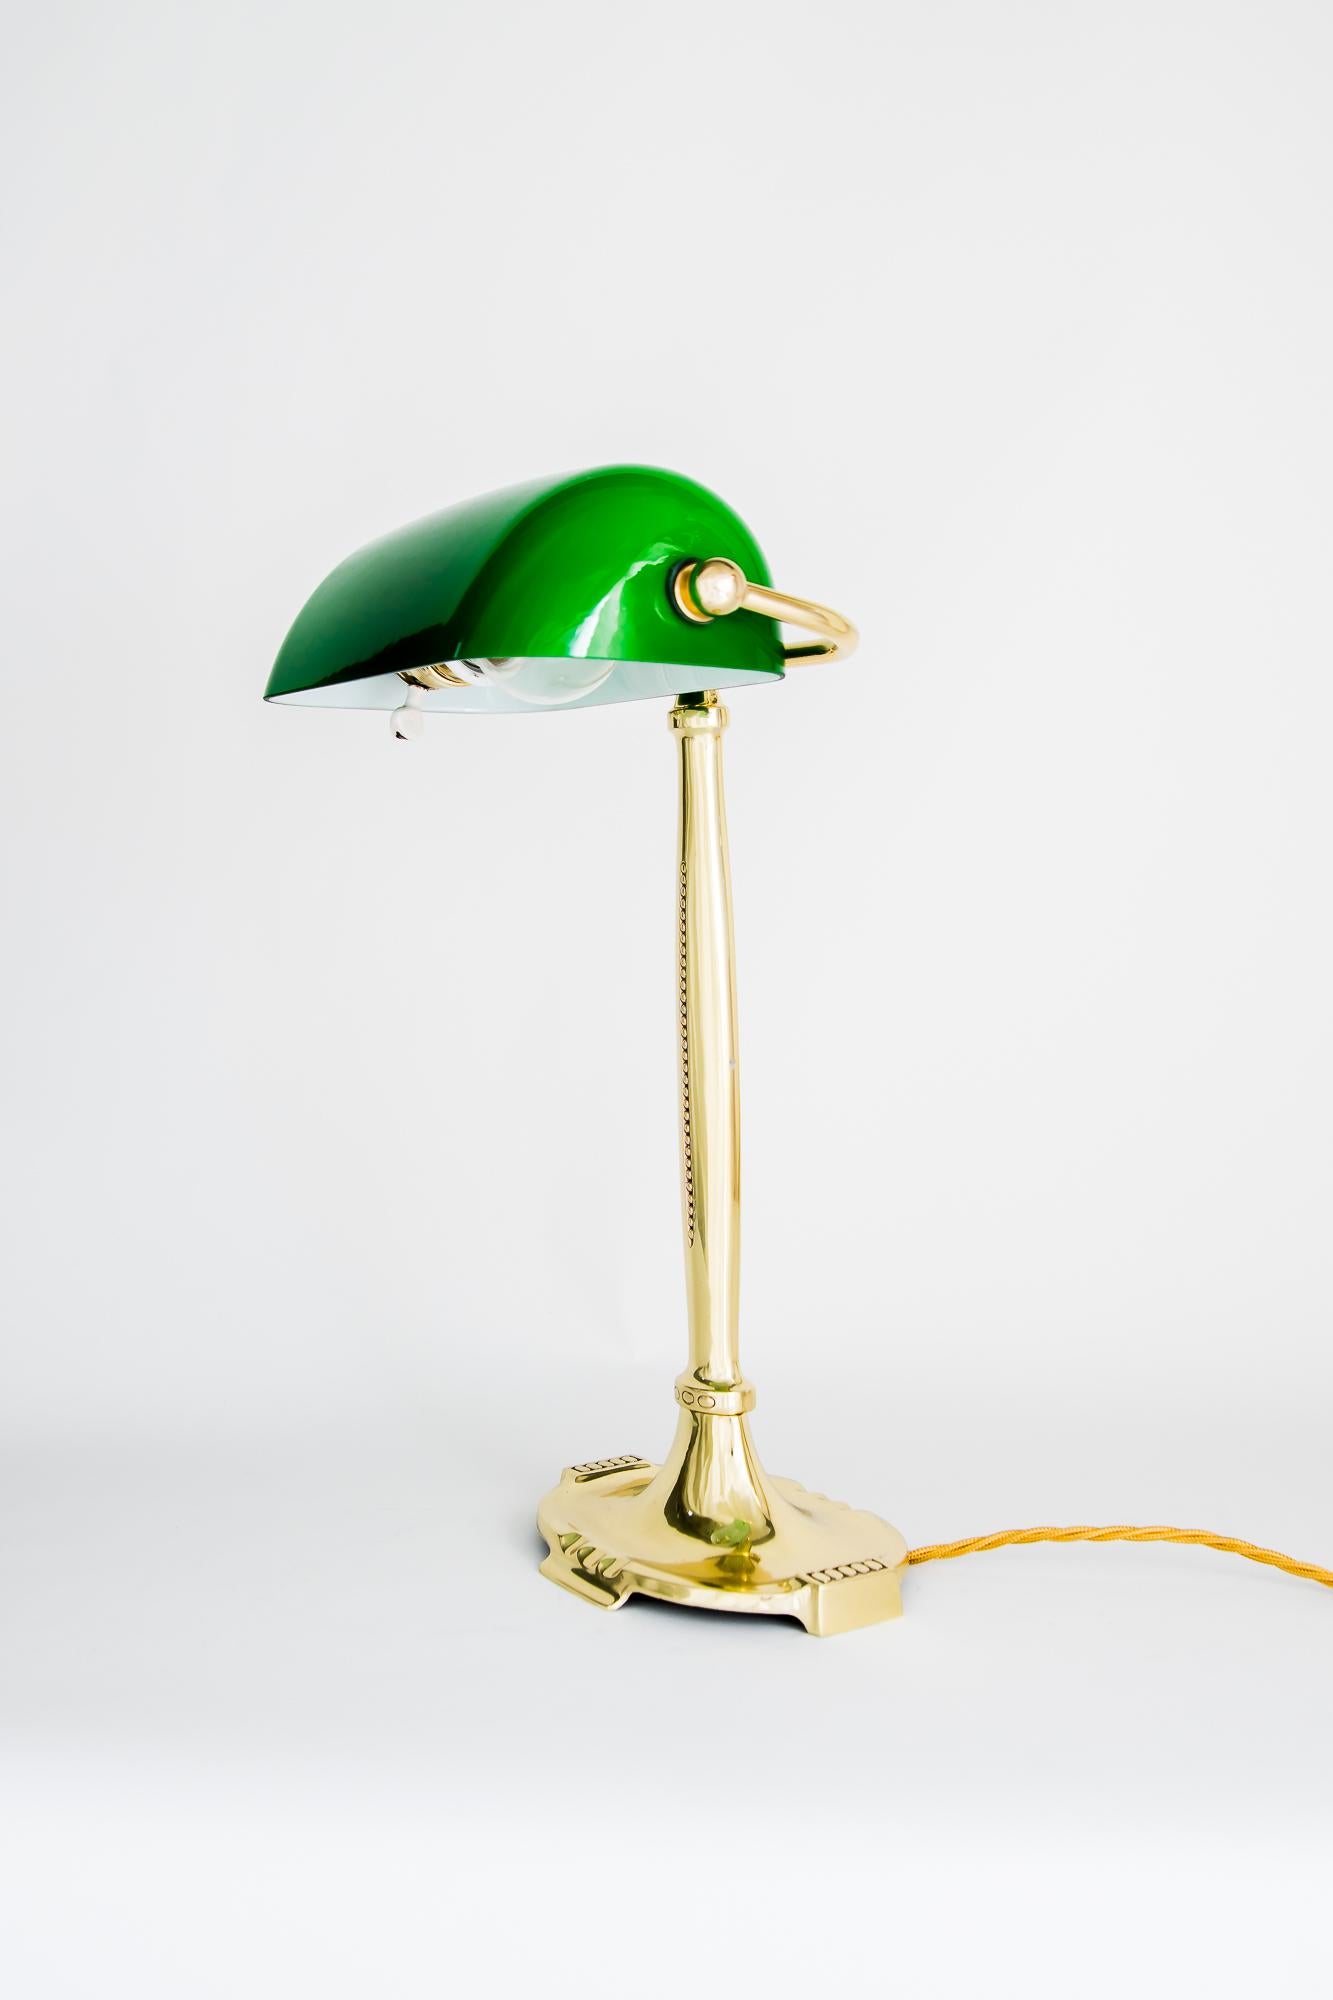 Art Deco table lamp with original green shade, vienna, around 1920s
Polished and stove enamelled
New rewired.